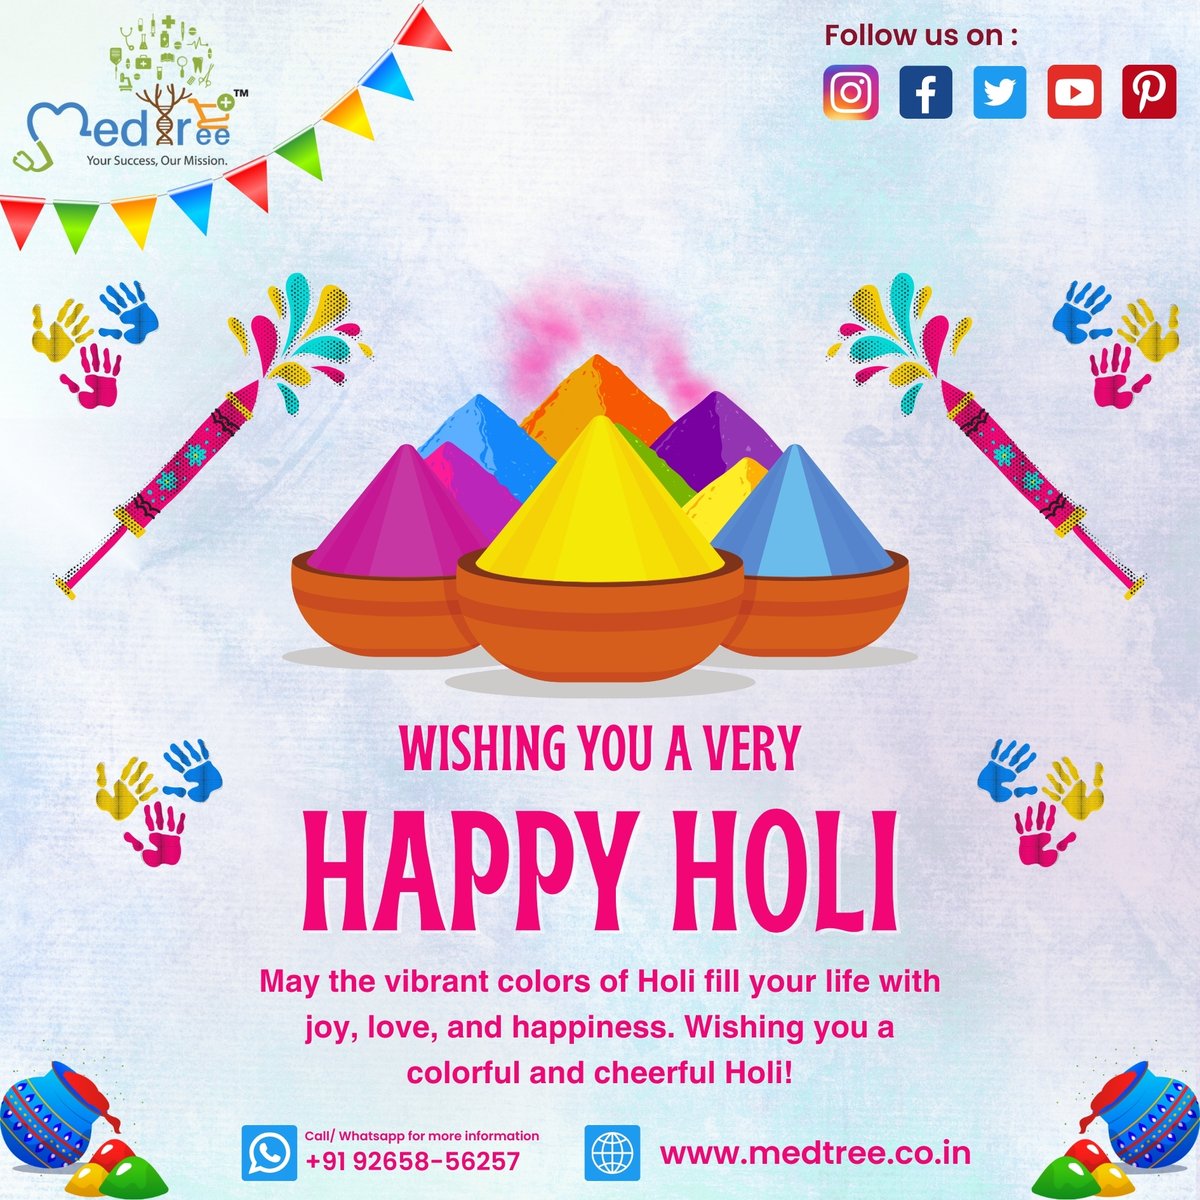 🎉🌈 MedTree wishes you all Happy Holi! 🎨 Let's celebrate the festival of colors with joy and harmony. 🎊 Don't miss out on our exclusive Holi offers!  💫 🛍️ 
#HappyHoli #Holi2024 #Holi #CelebrationTime #ColorfulLife #Holi offer #Holisale #MemoriesToCherish #HoliSpirit #Medtree